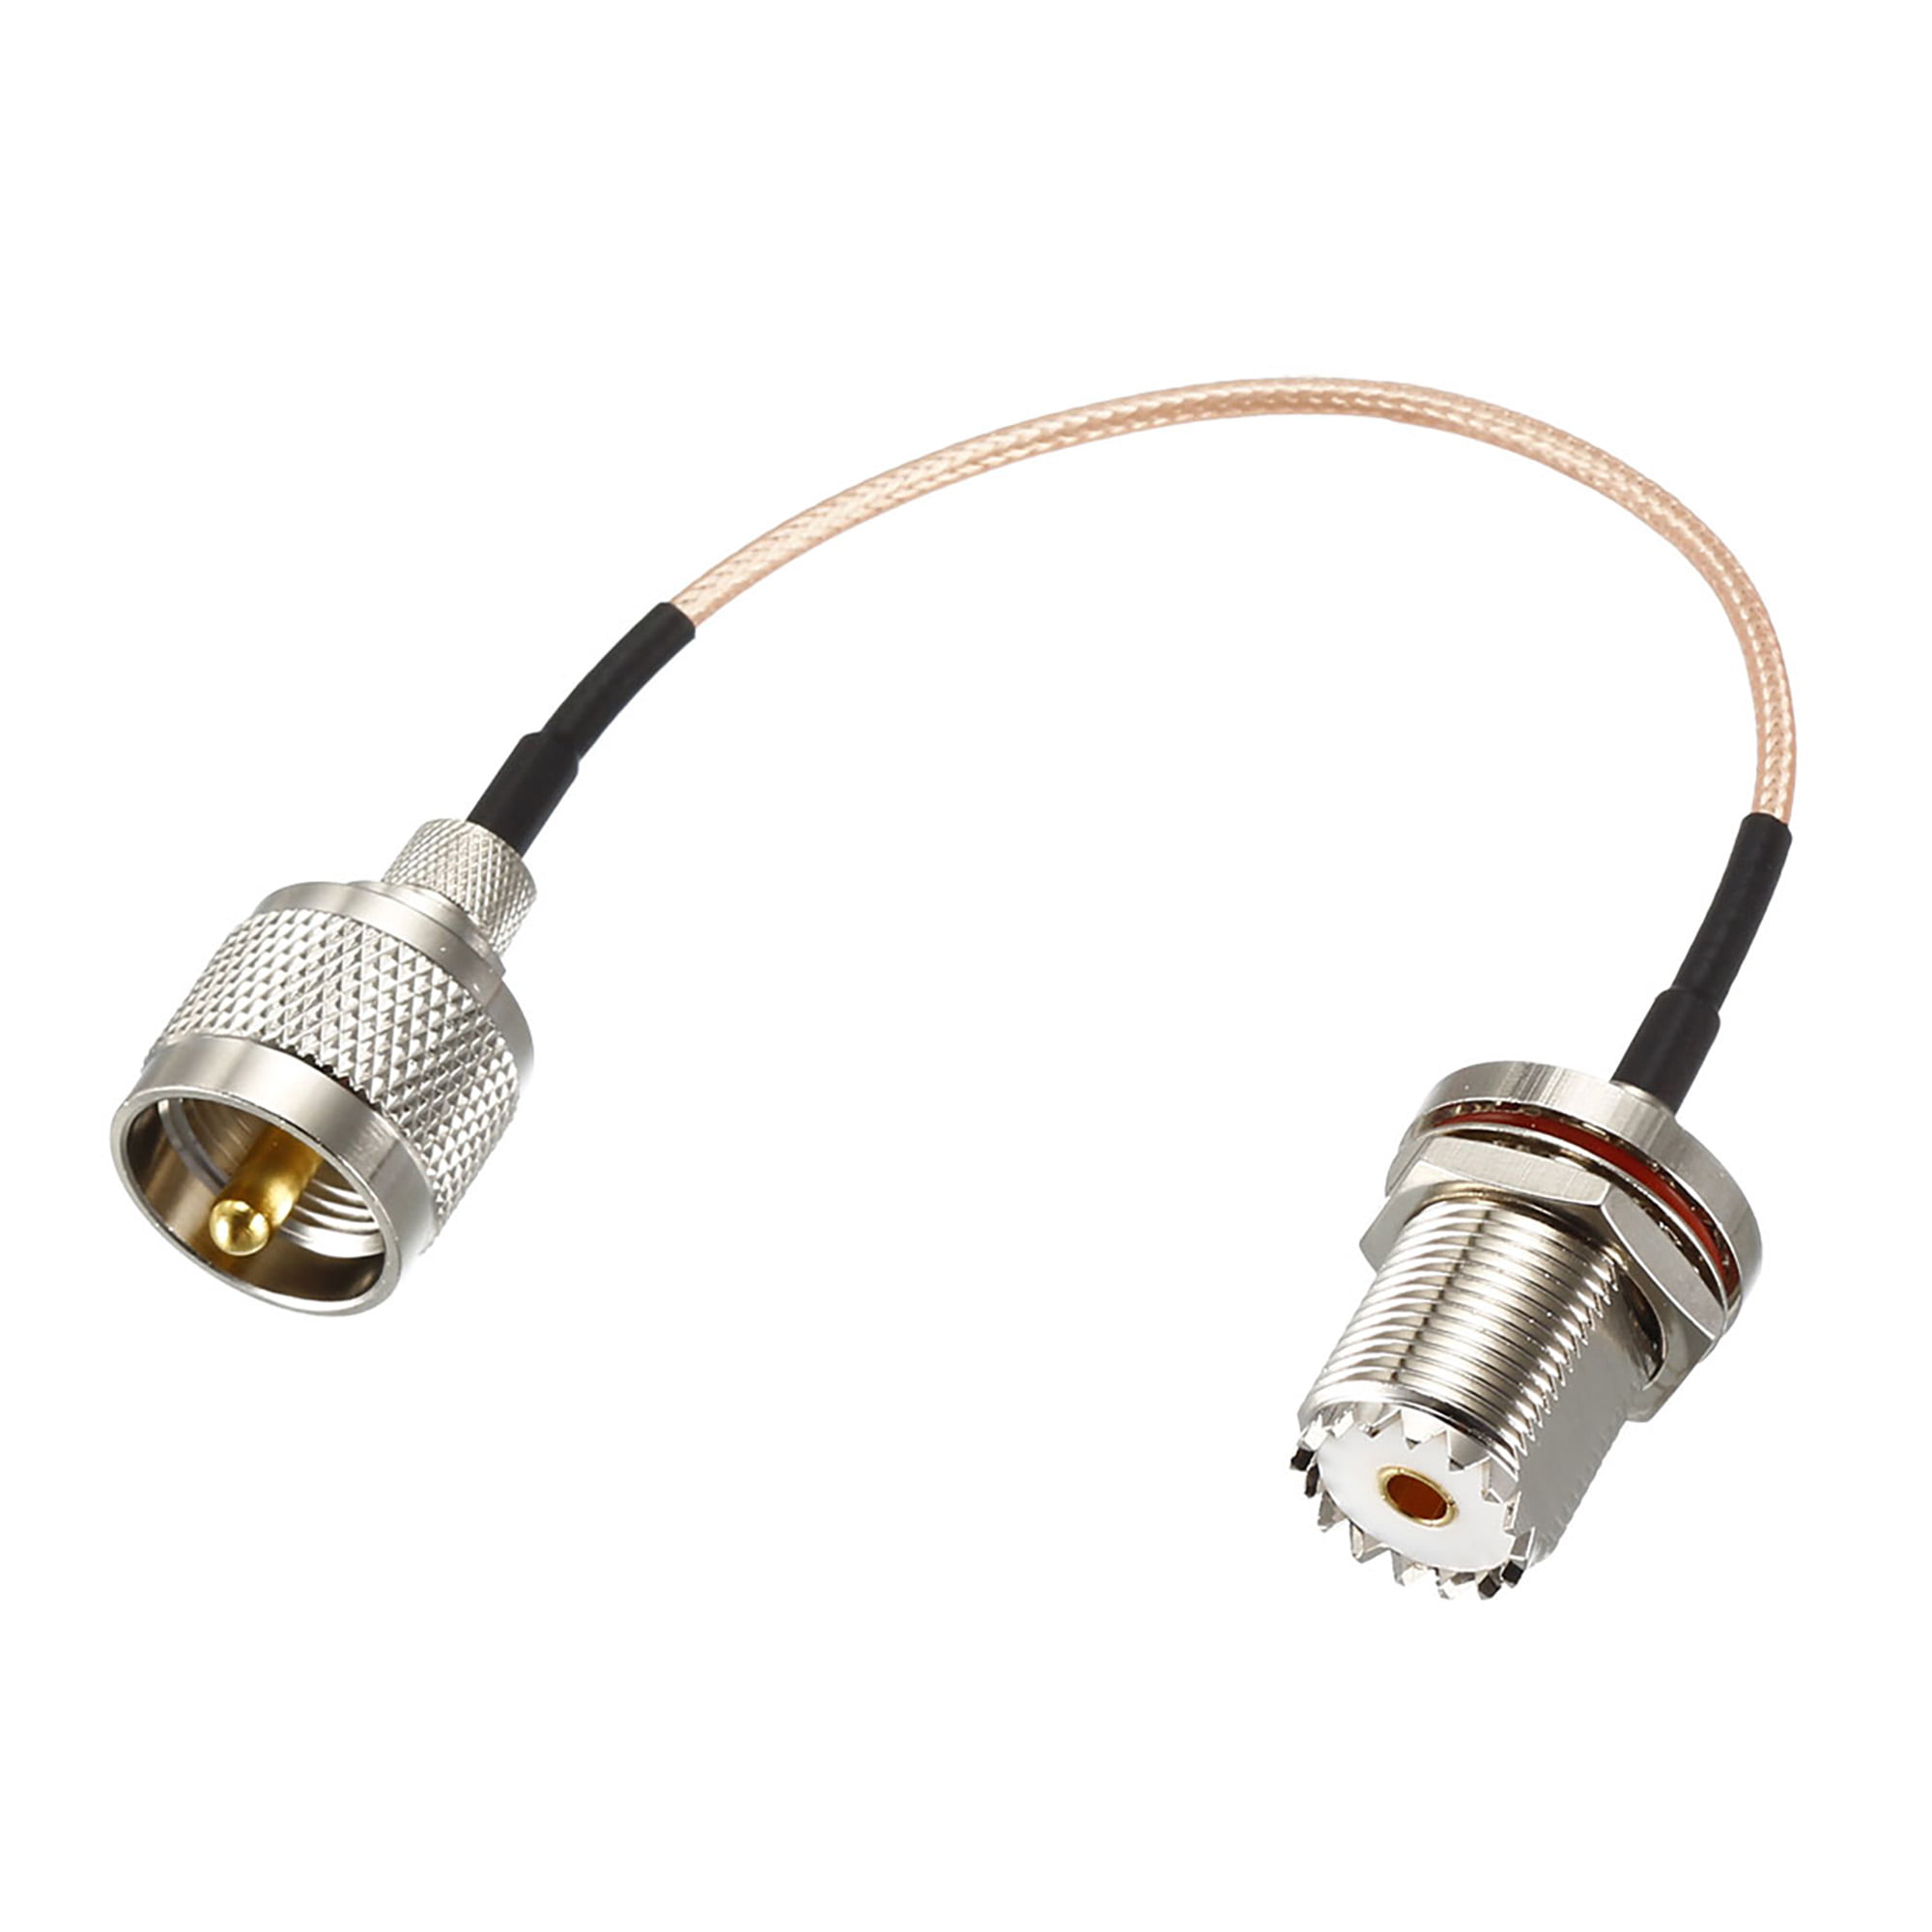 1 Foot RG400 Silver Plated BNC Male to PL259 UHF Male RF Coaxial Cable